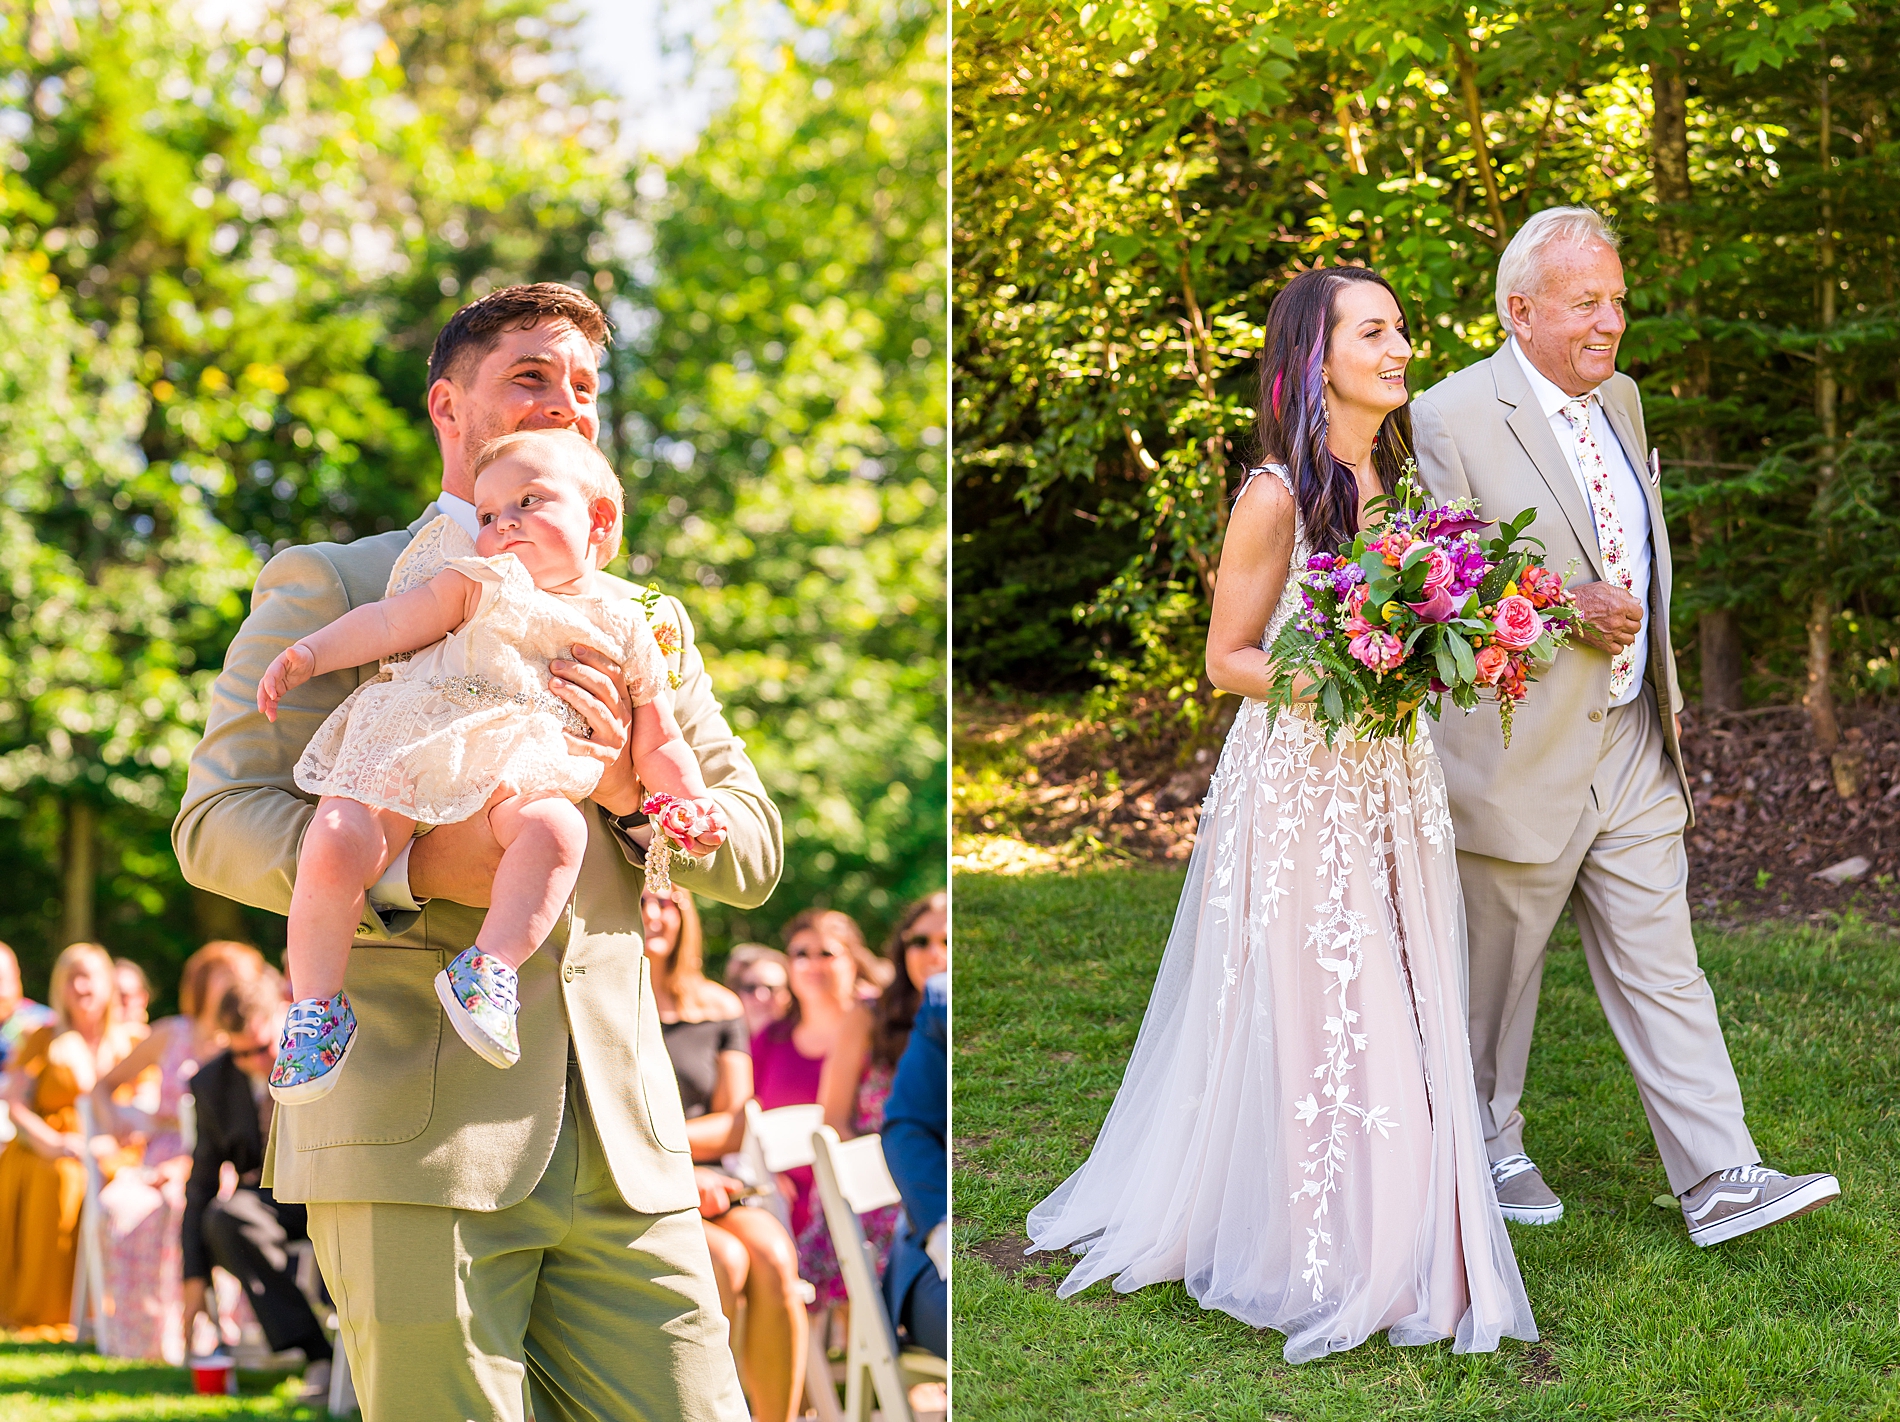 groom with his daughter and bride walks down the aisle with her father